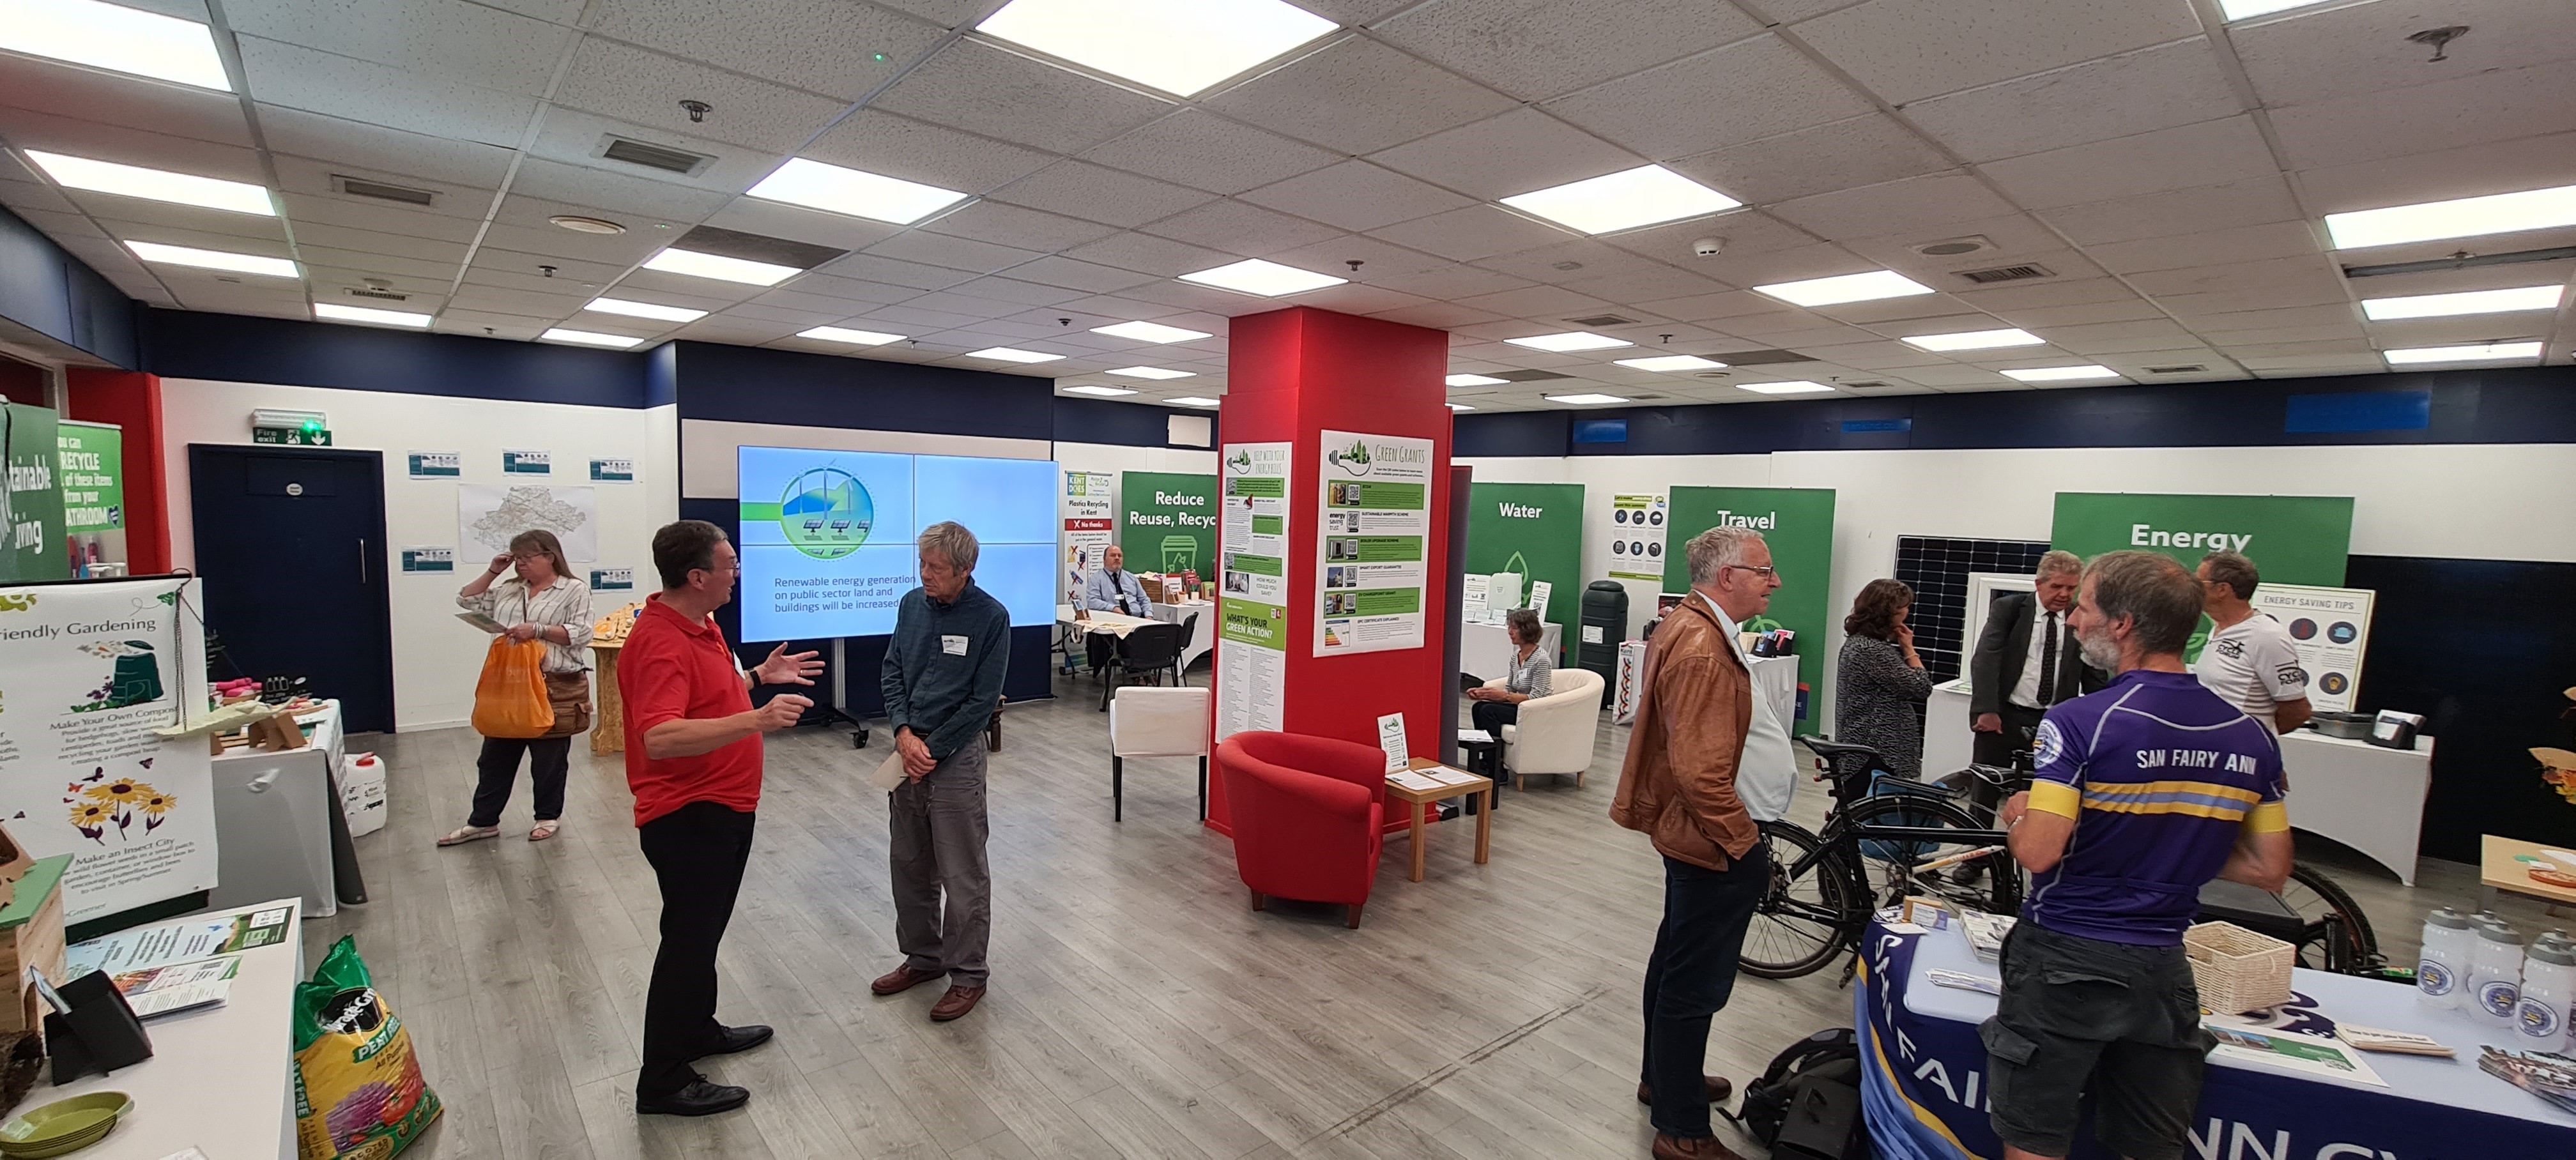 Volunteers and organisations needed for Maidstone’s Eco Hub this August